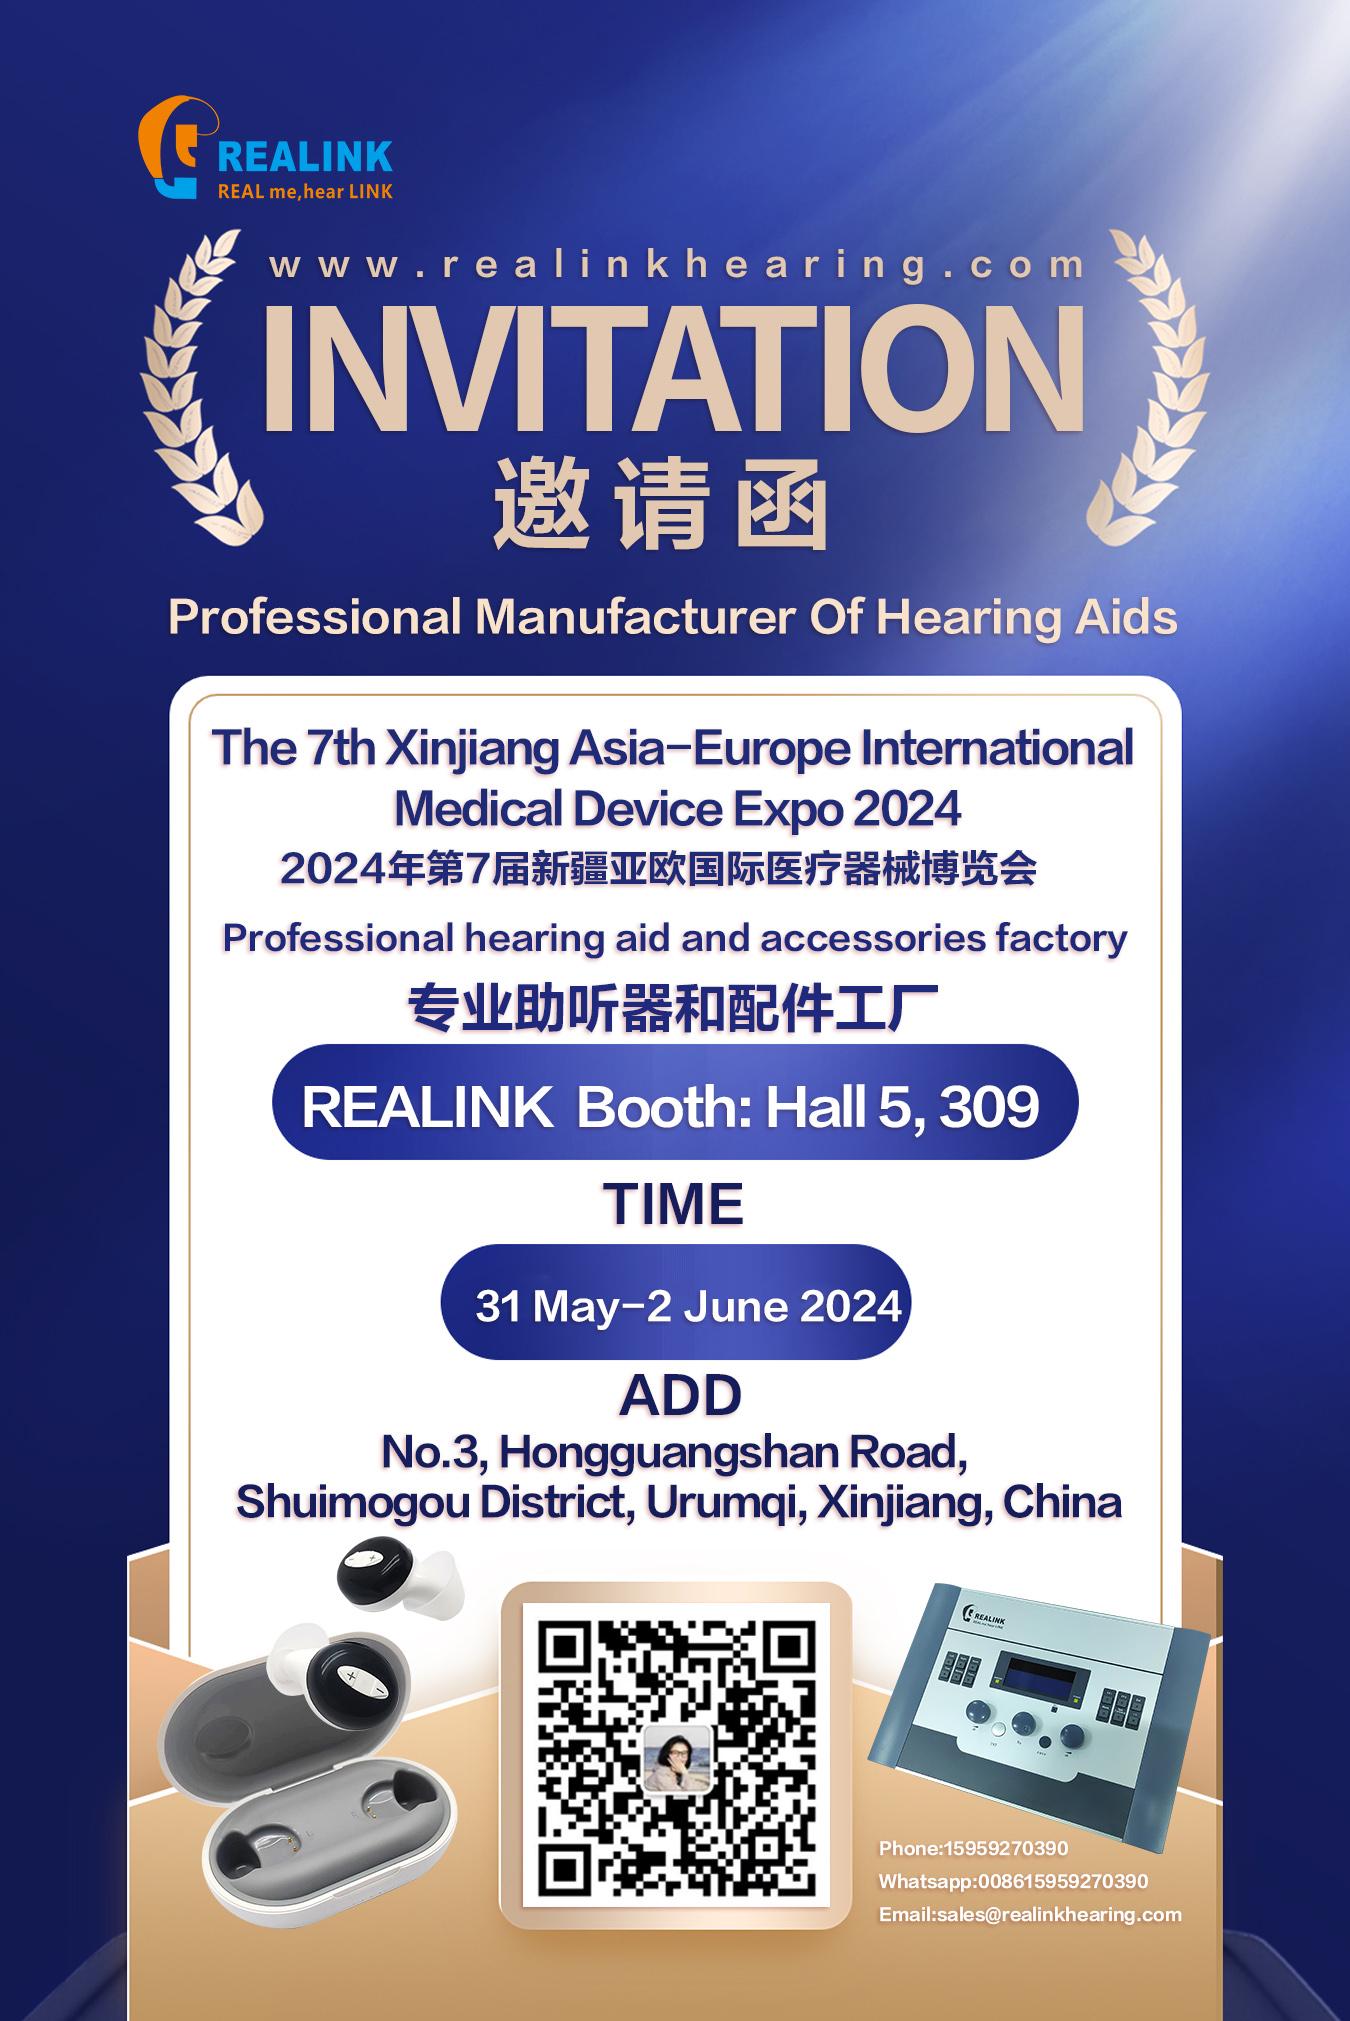 Grand launch of new hearing aid products